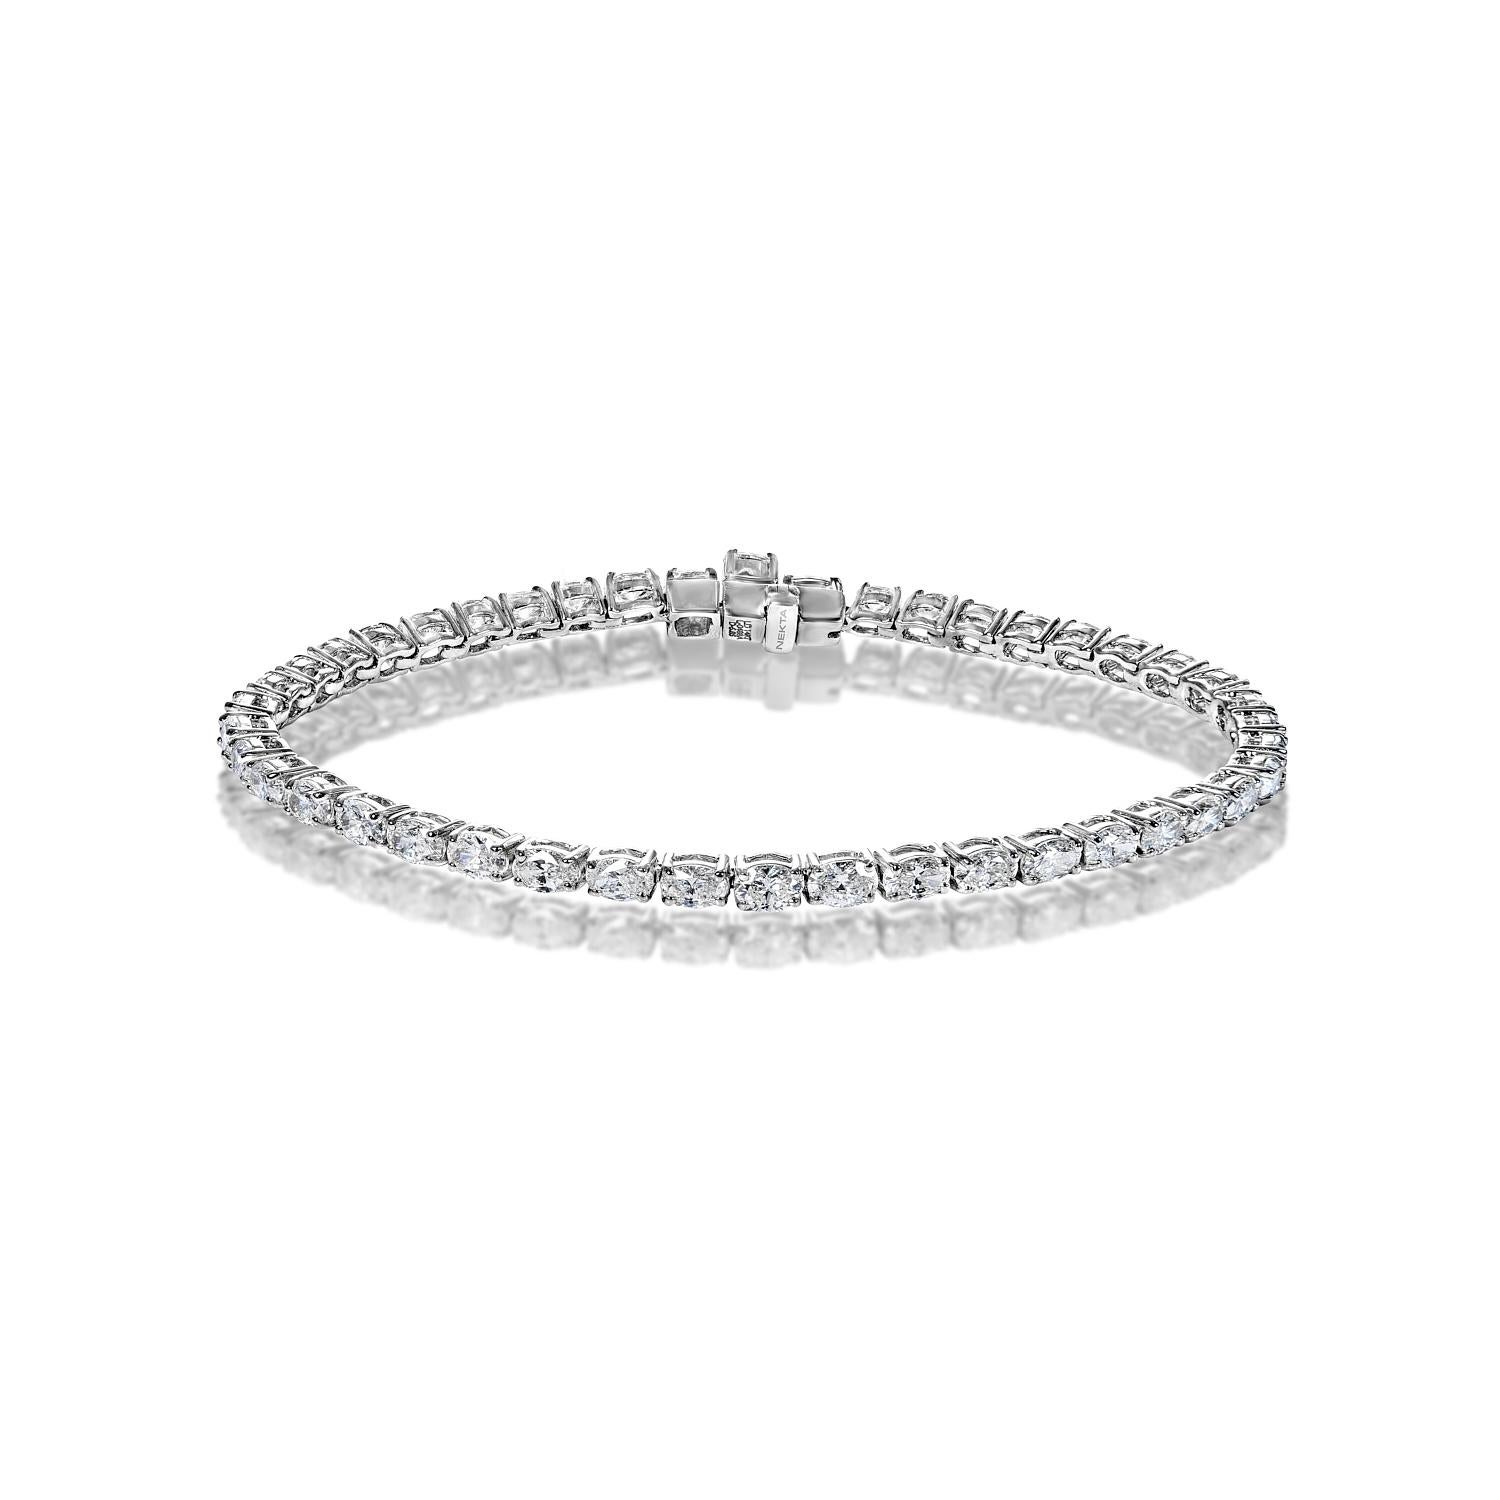 The Alessia 5.85 Carat Single Row Diamond Tennis Bracelet features OVAL CUT DIAMONDS brilliants weighing a total of approximately 5.85 carats, set in 14K White Gold.

Style: Single Row Diamond Tennis Bracelet
Diamonds
Diamond Size: 5.85